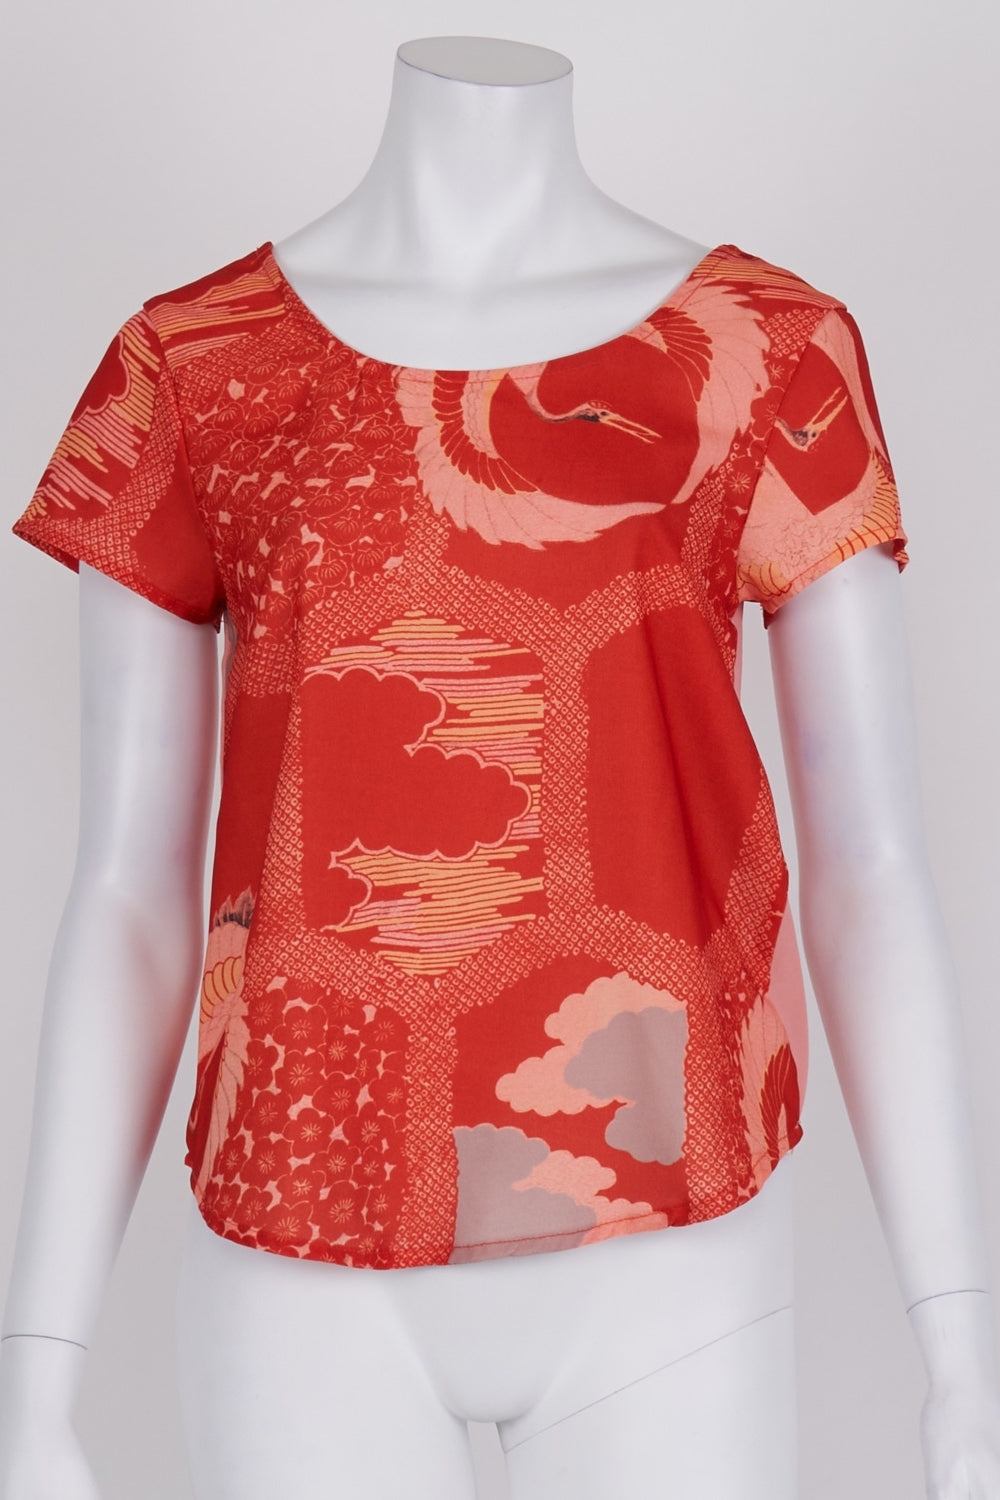 Paint It Red Patterned Sheer Top XS